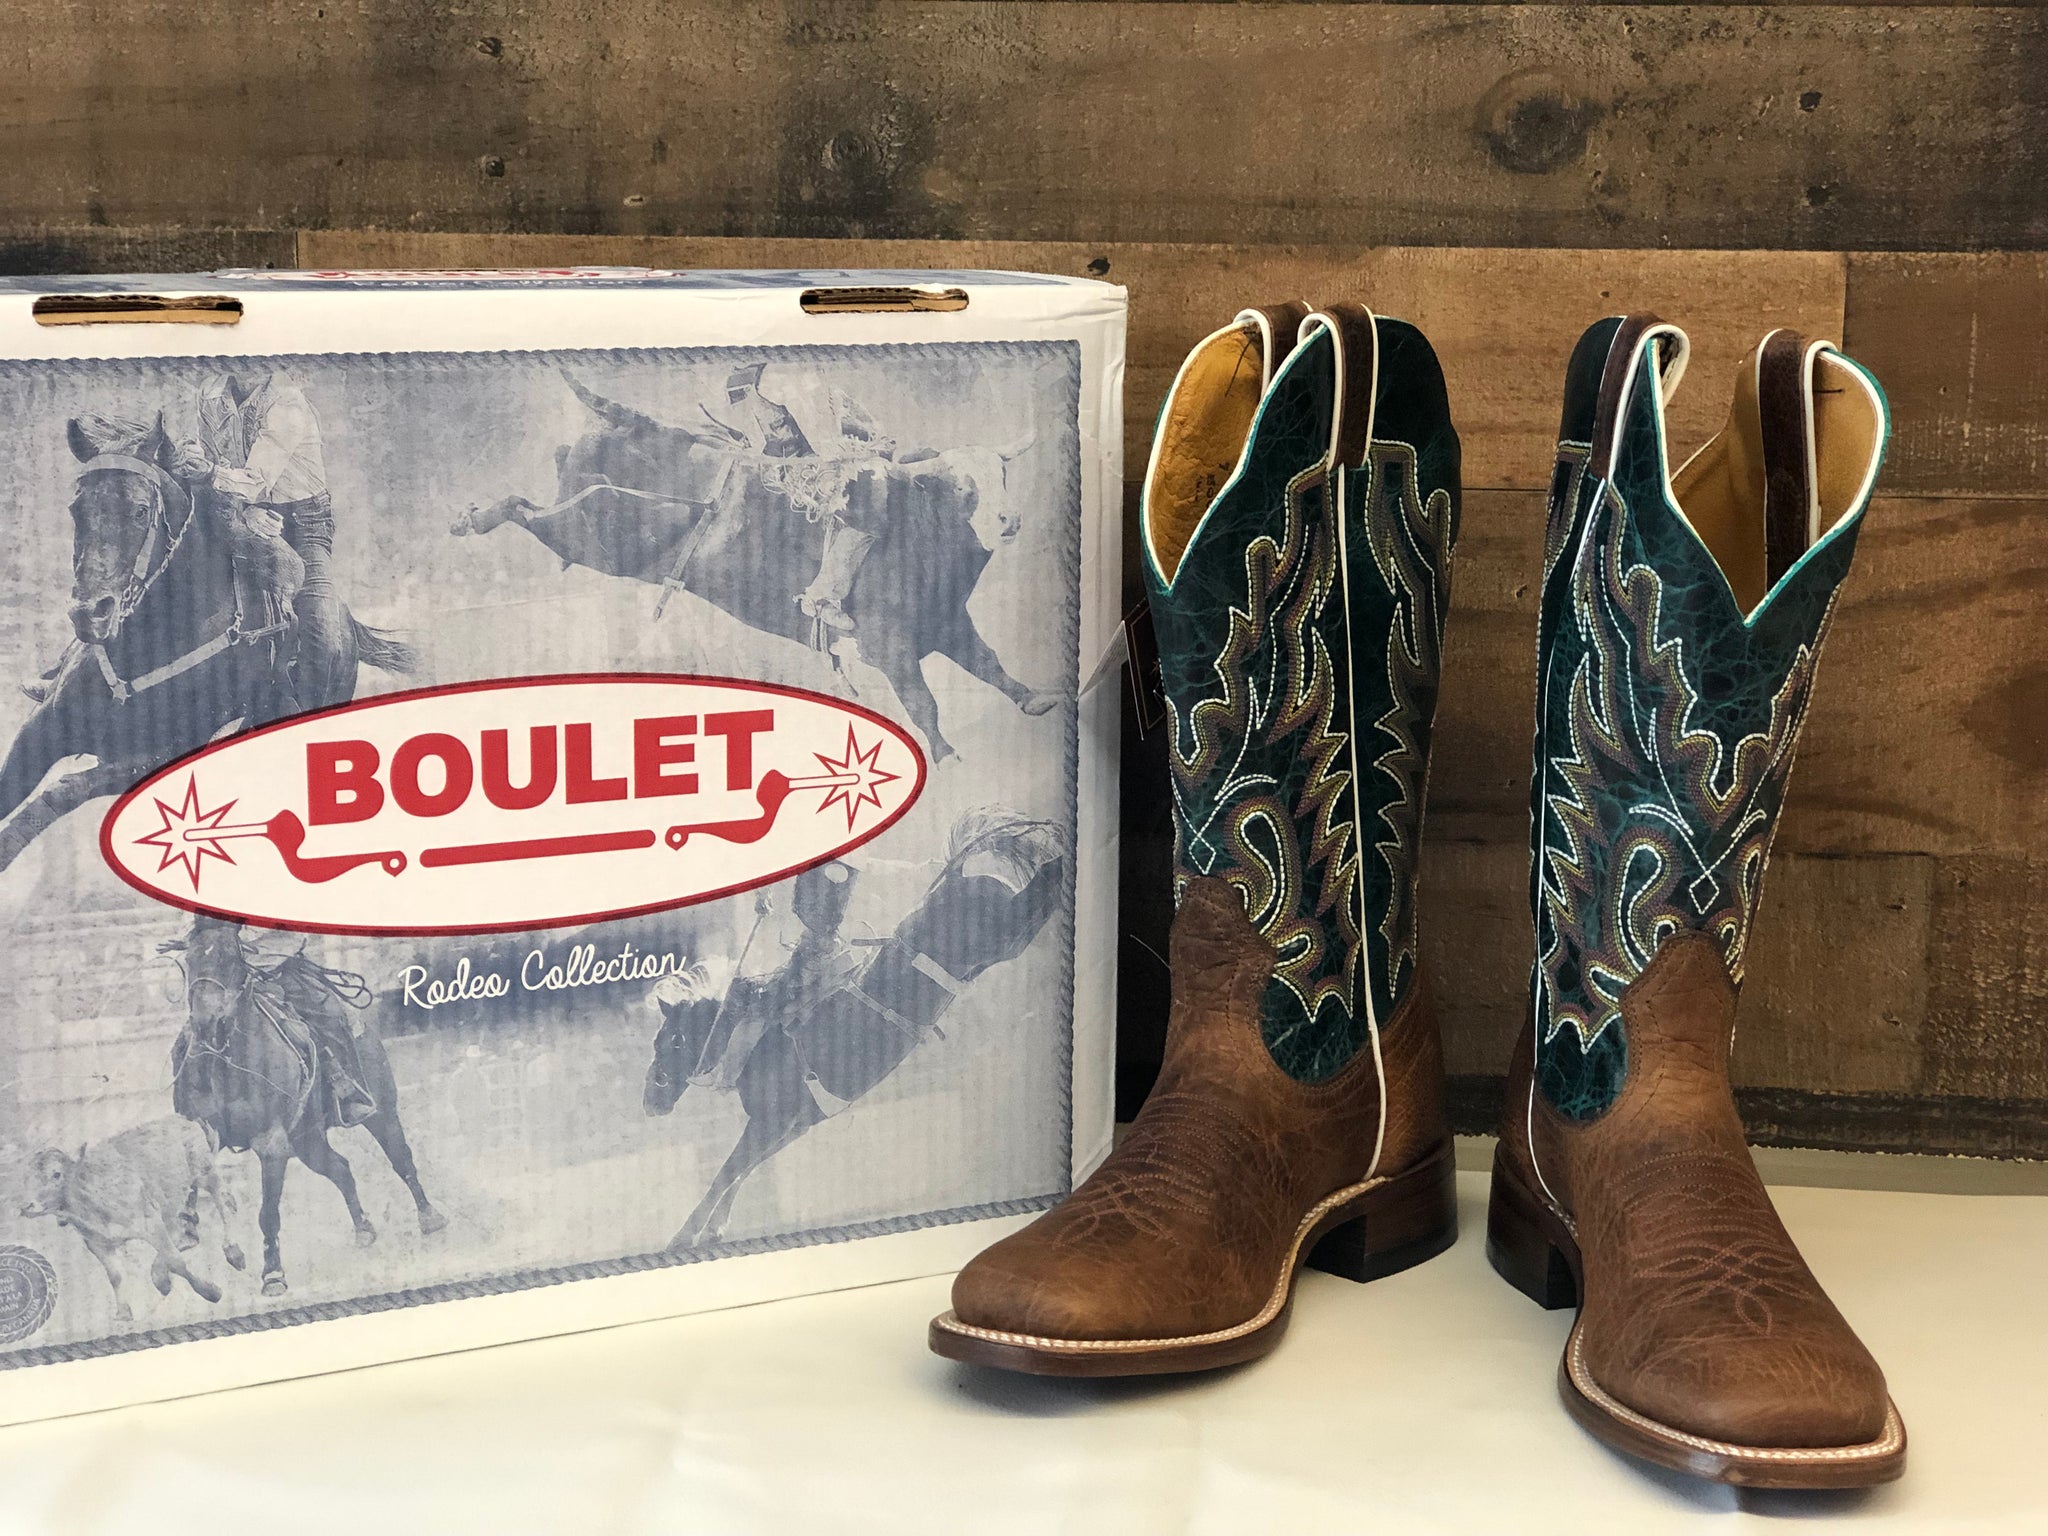 boulet rodeo collection